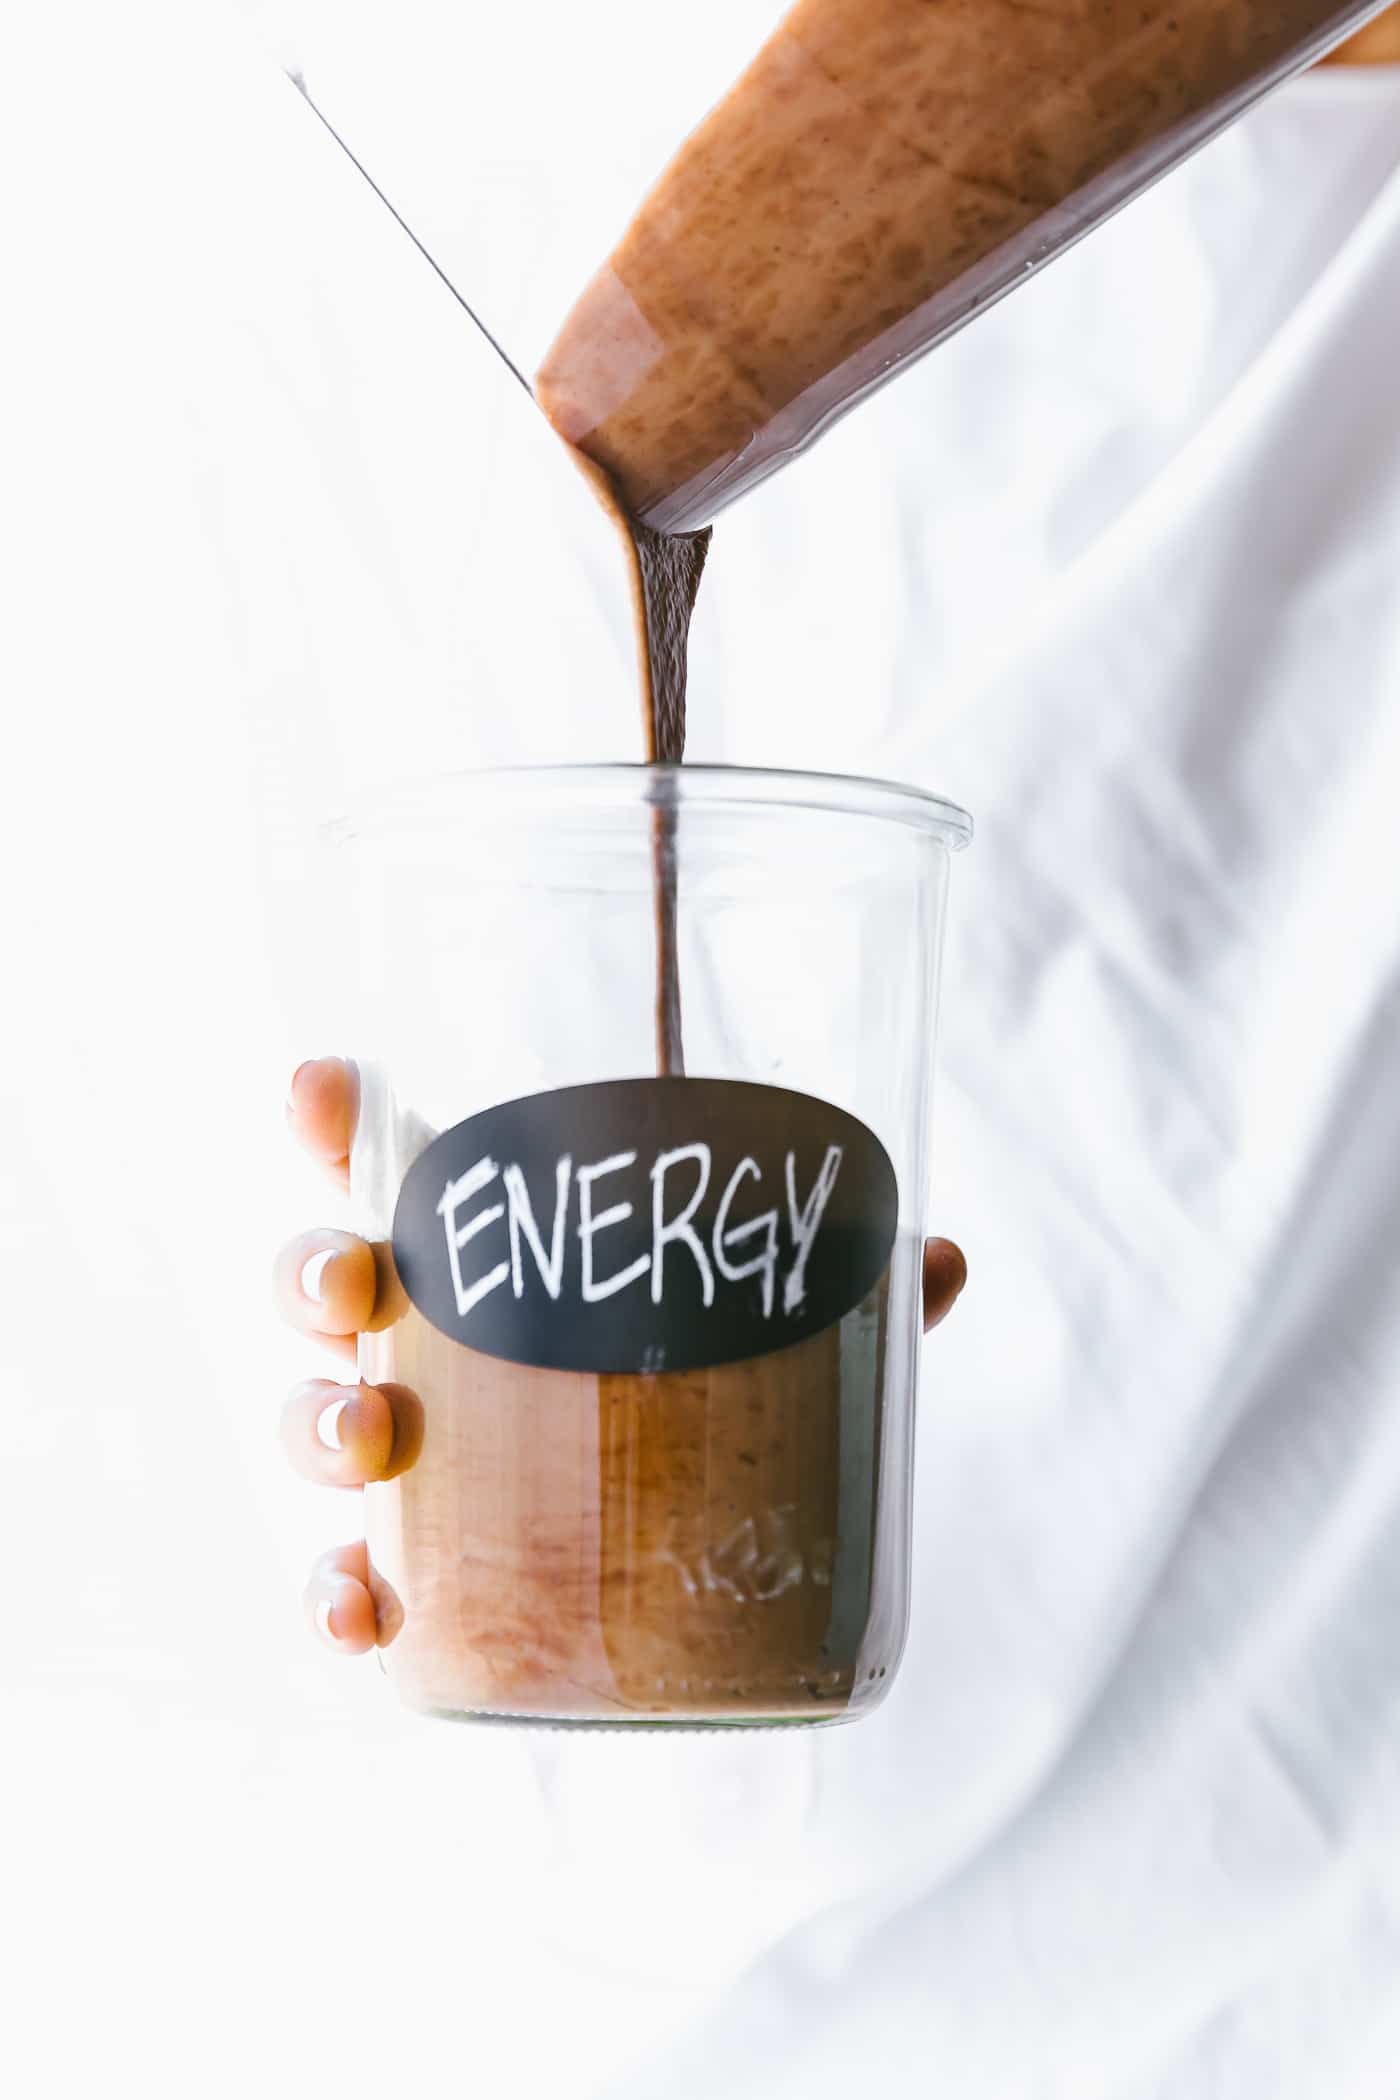 Chocolate smoothie being poured into a glass jar with black label white words 'energy'